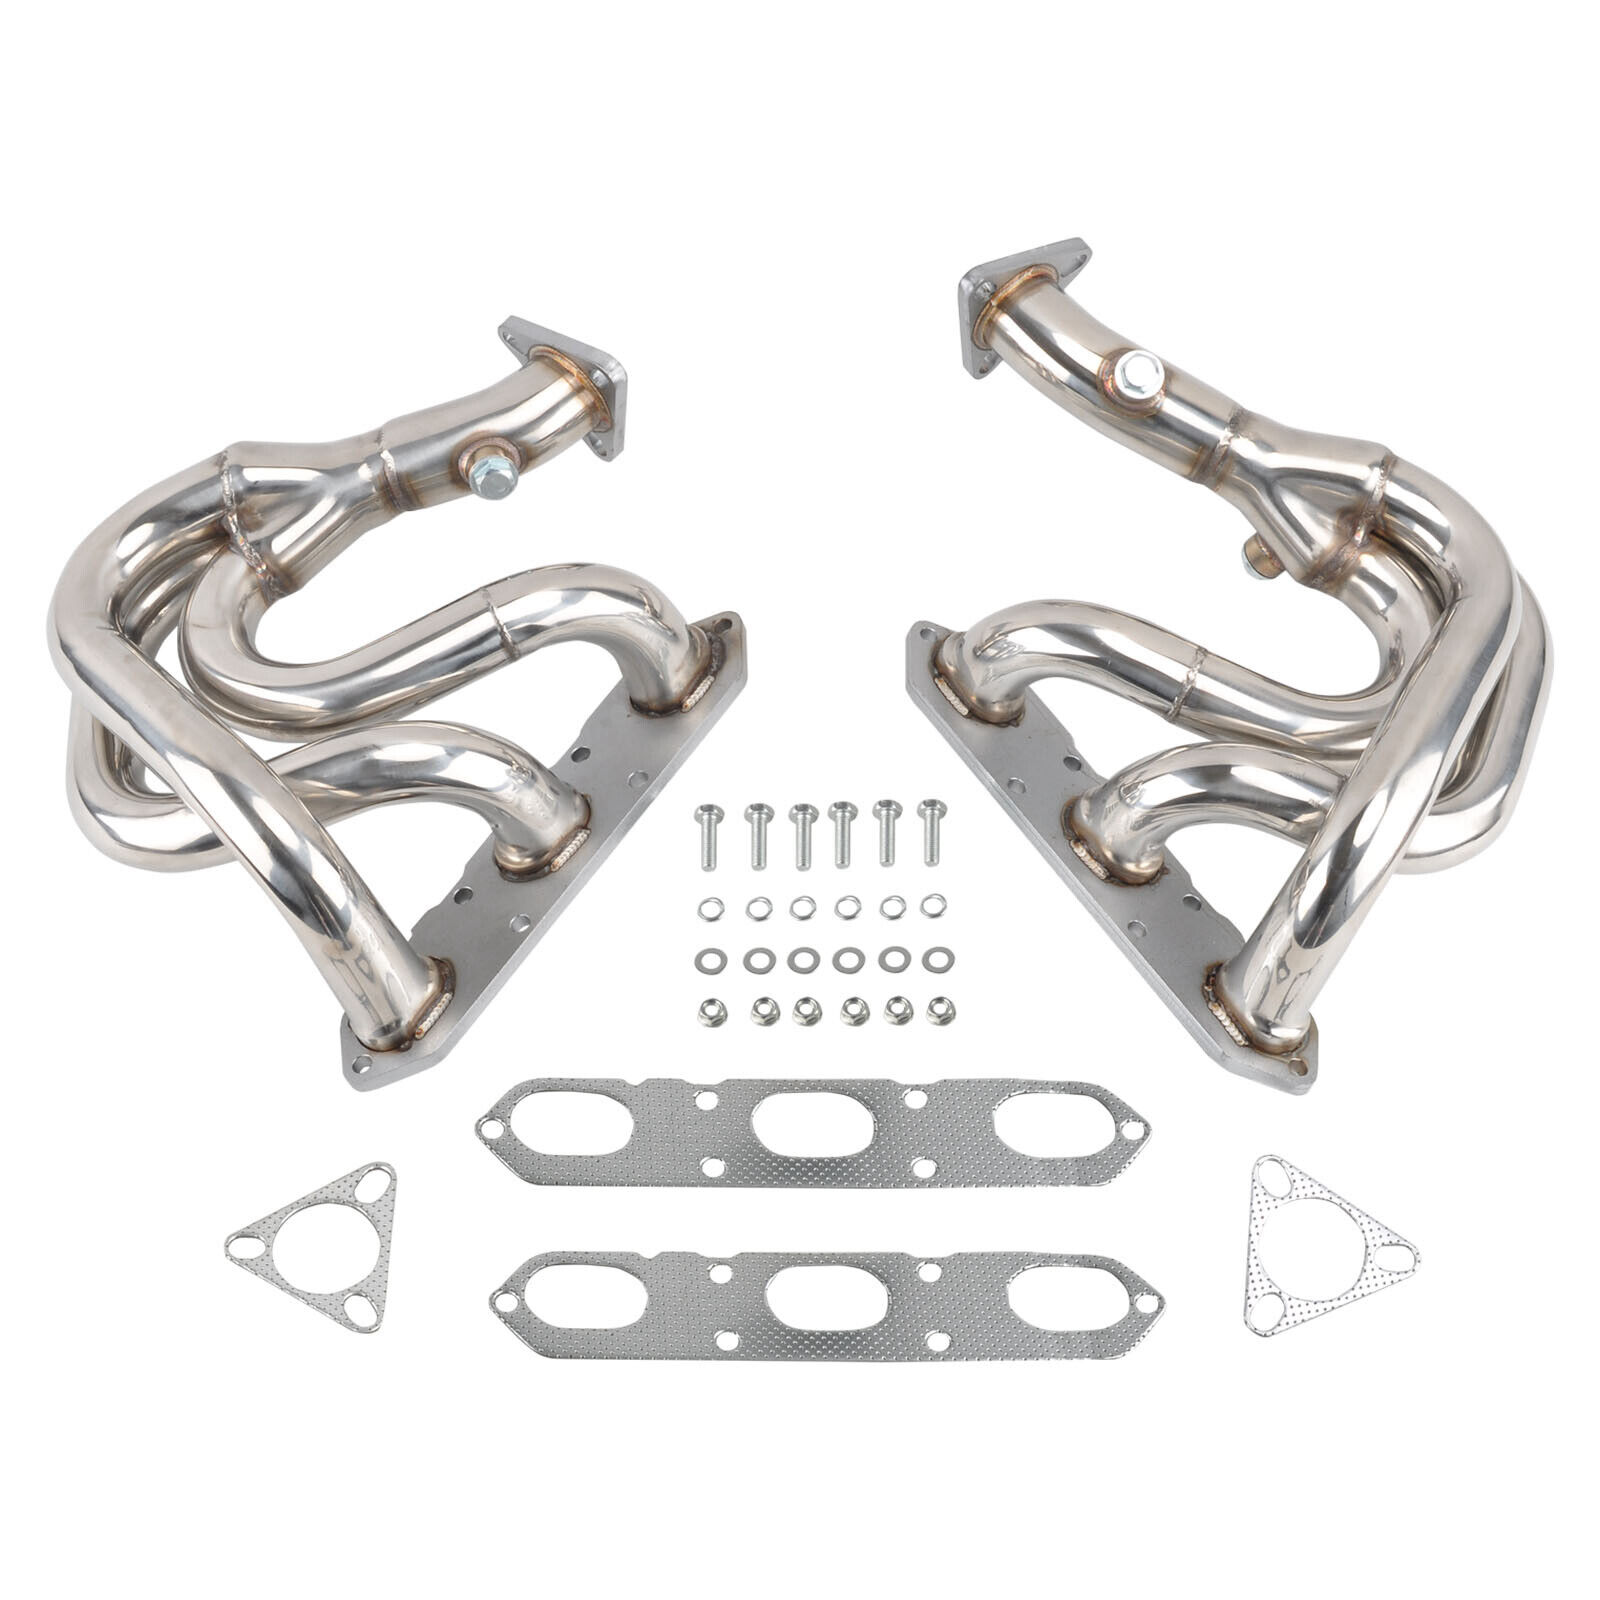 Stainless Steel Exhaust Manifold Fits Porsche Boxster 986 2.5L & 2.7L 1997-2004